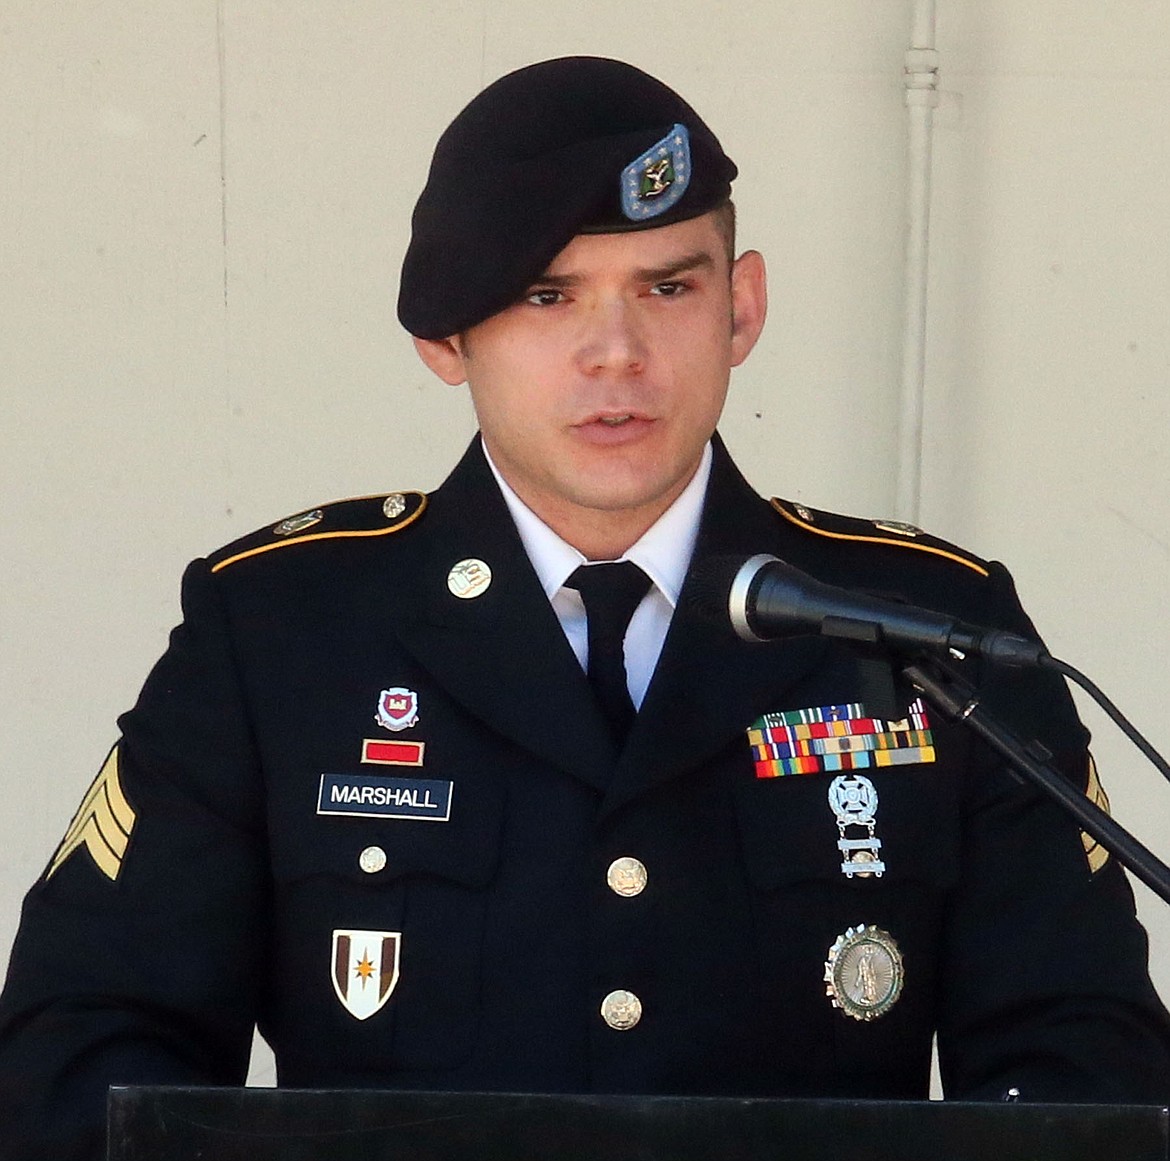 Sgt. Danial Marshall of the Idaho Army National Guard exhorted his audience Monday to celebrate the lives of troops who died in combat. (JUDD WILSON/Press)